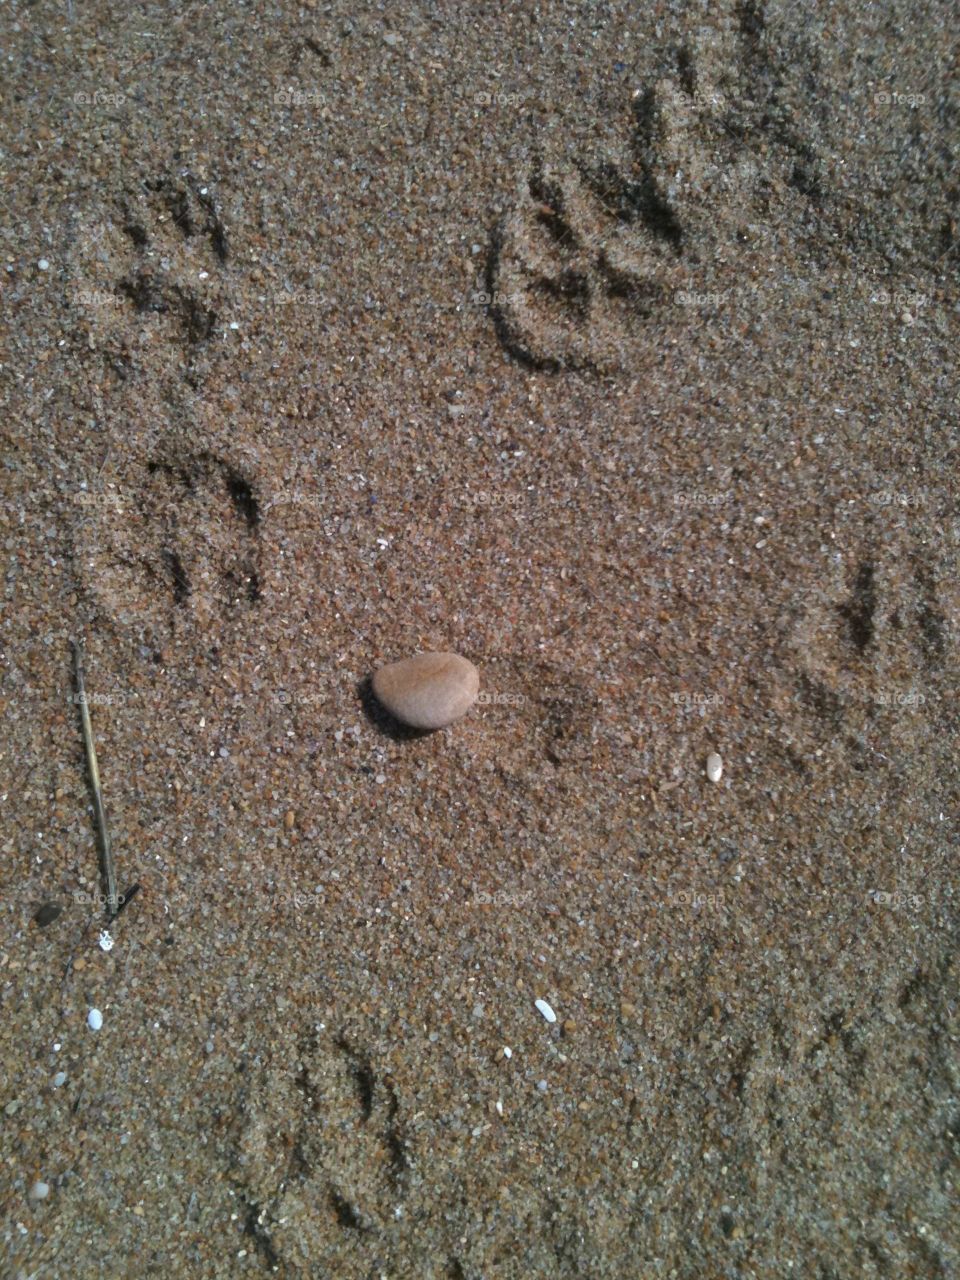 Paw prints In the sand 